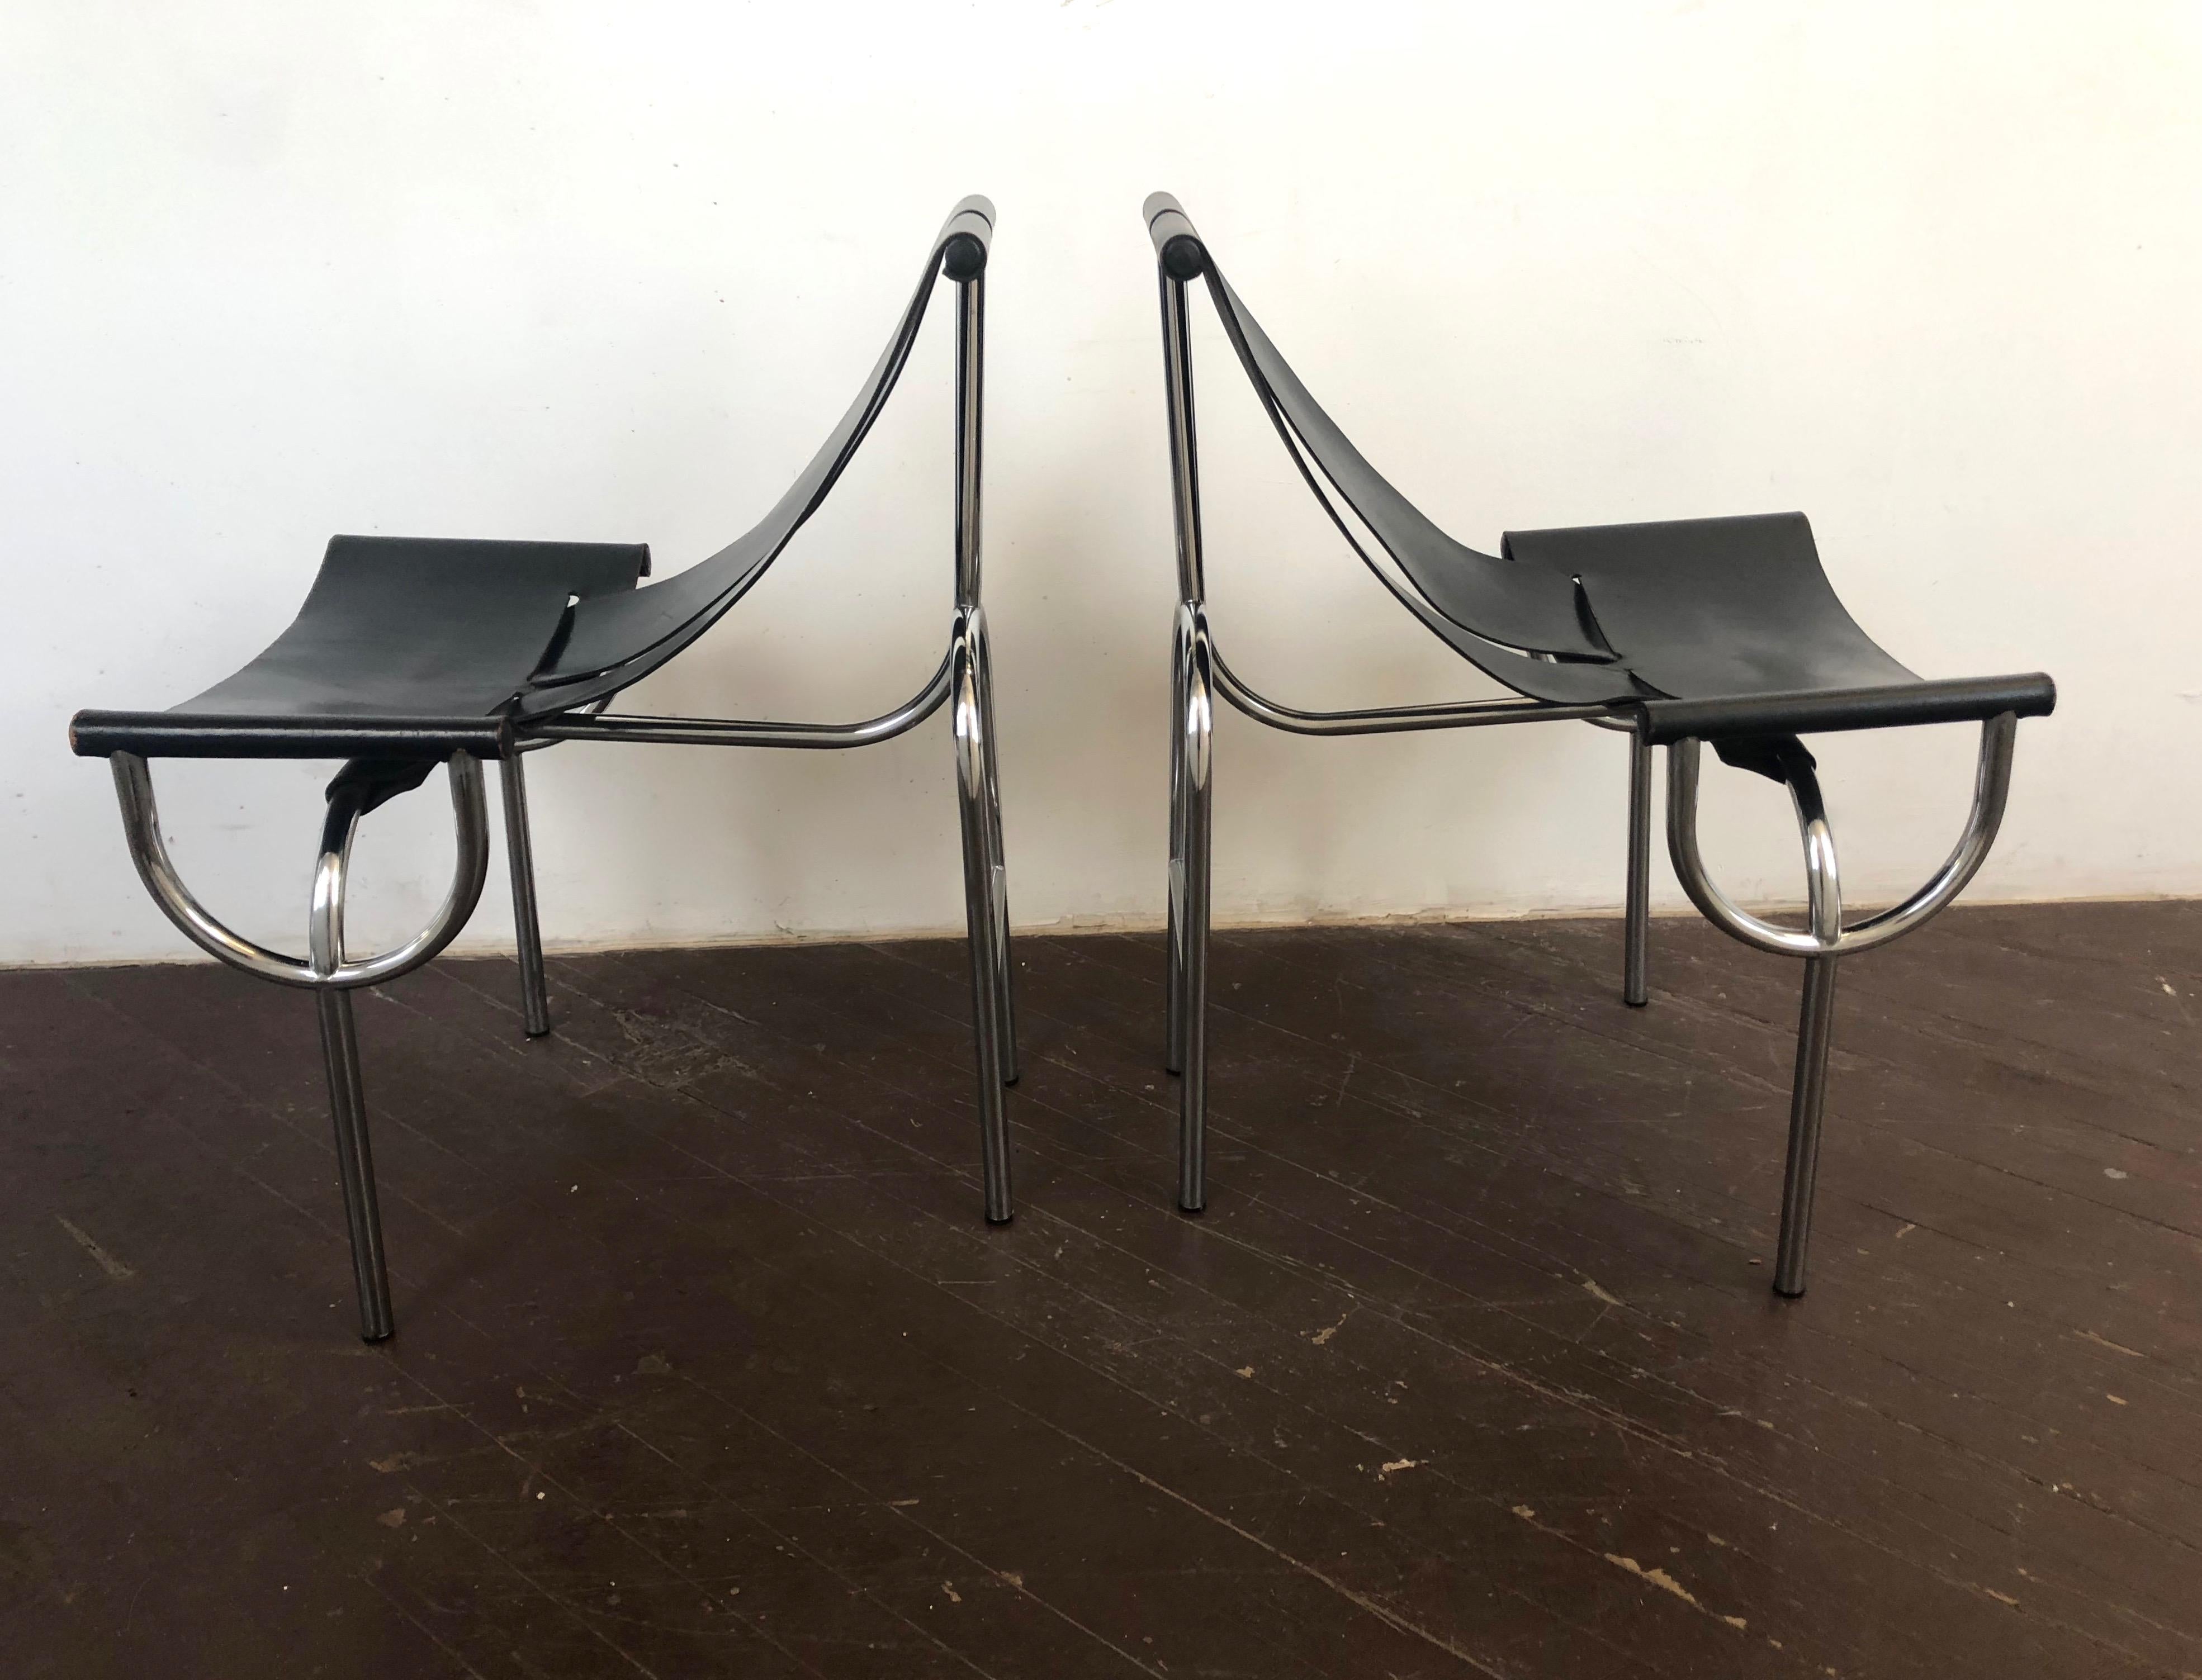 Original pair of black leather TRI 15 chairs designed in 1968 by architects Roberto Gabetti and Aimaro Isola with U-shaped detailed legs and frame in tubular chrome plated steel.